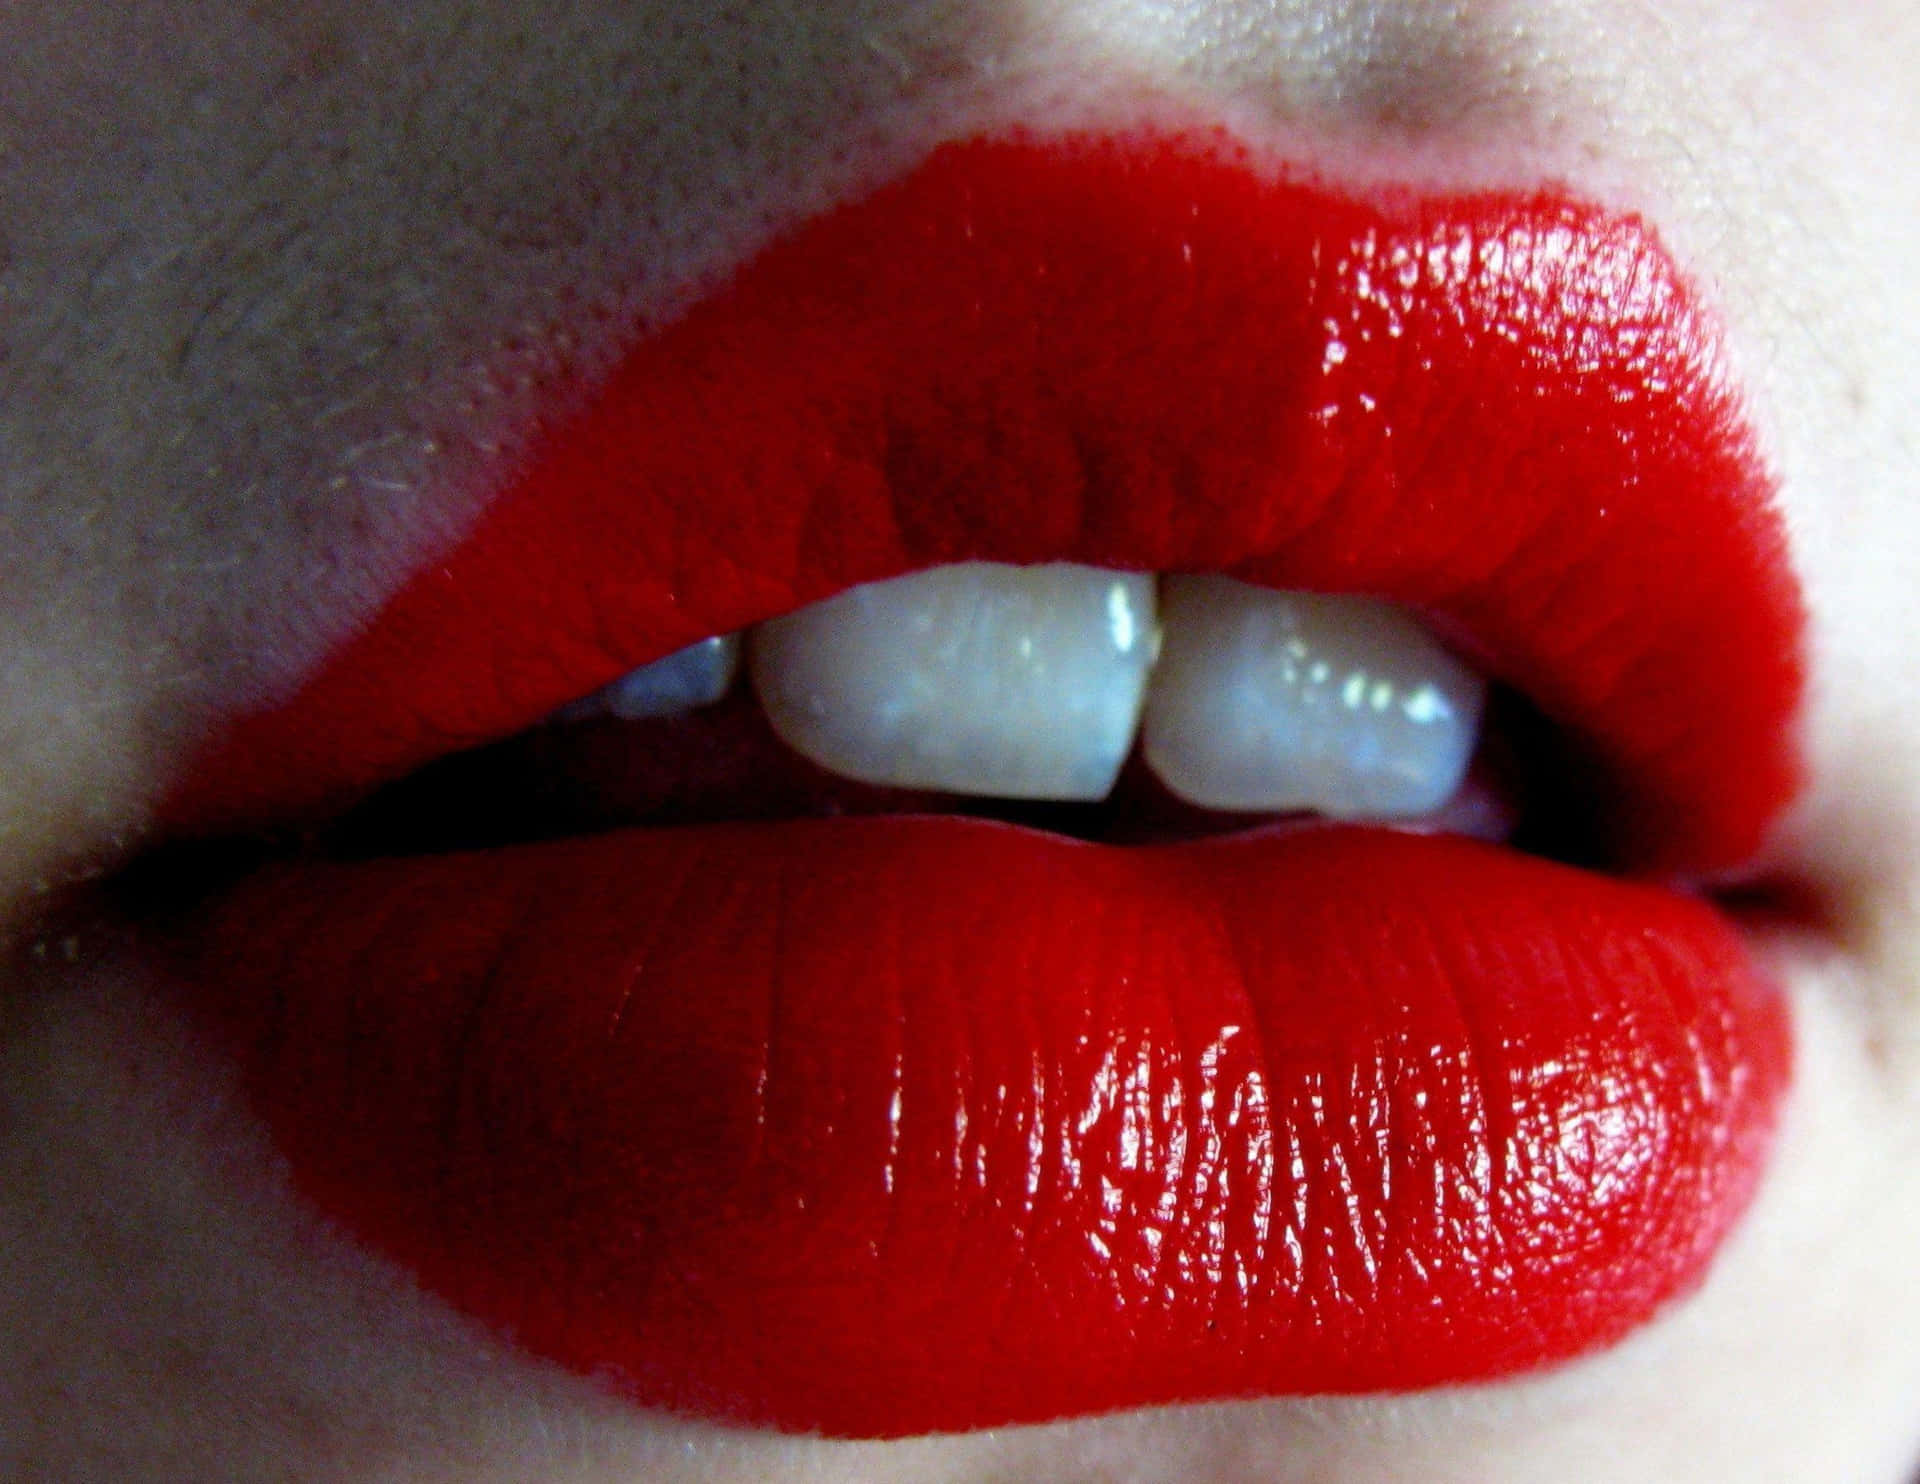 Caption: Closeup view of luscious red lips